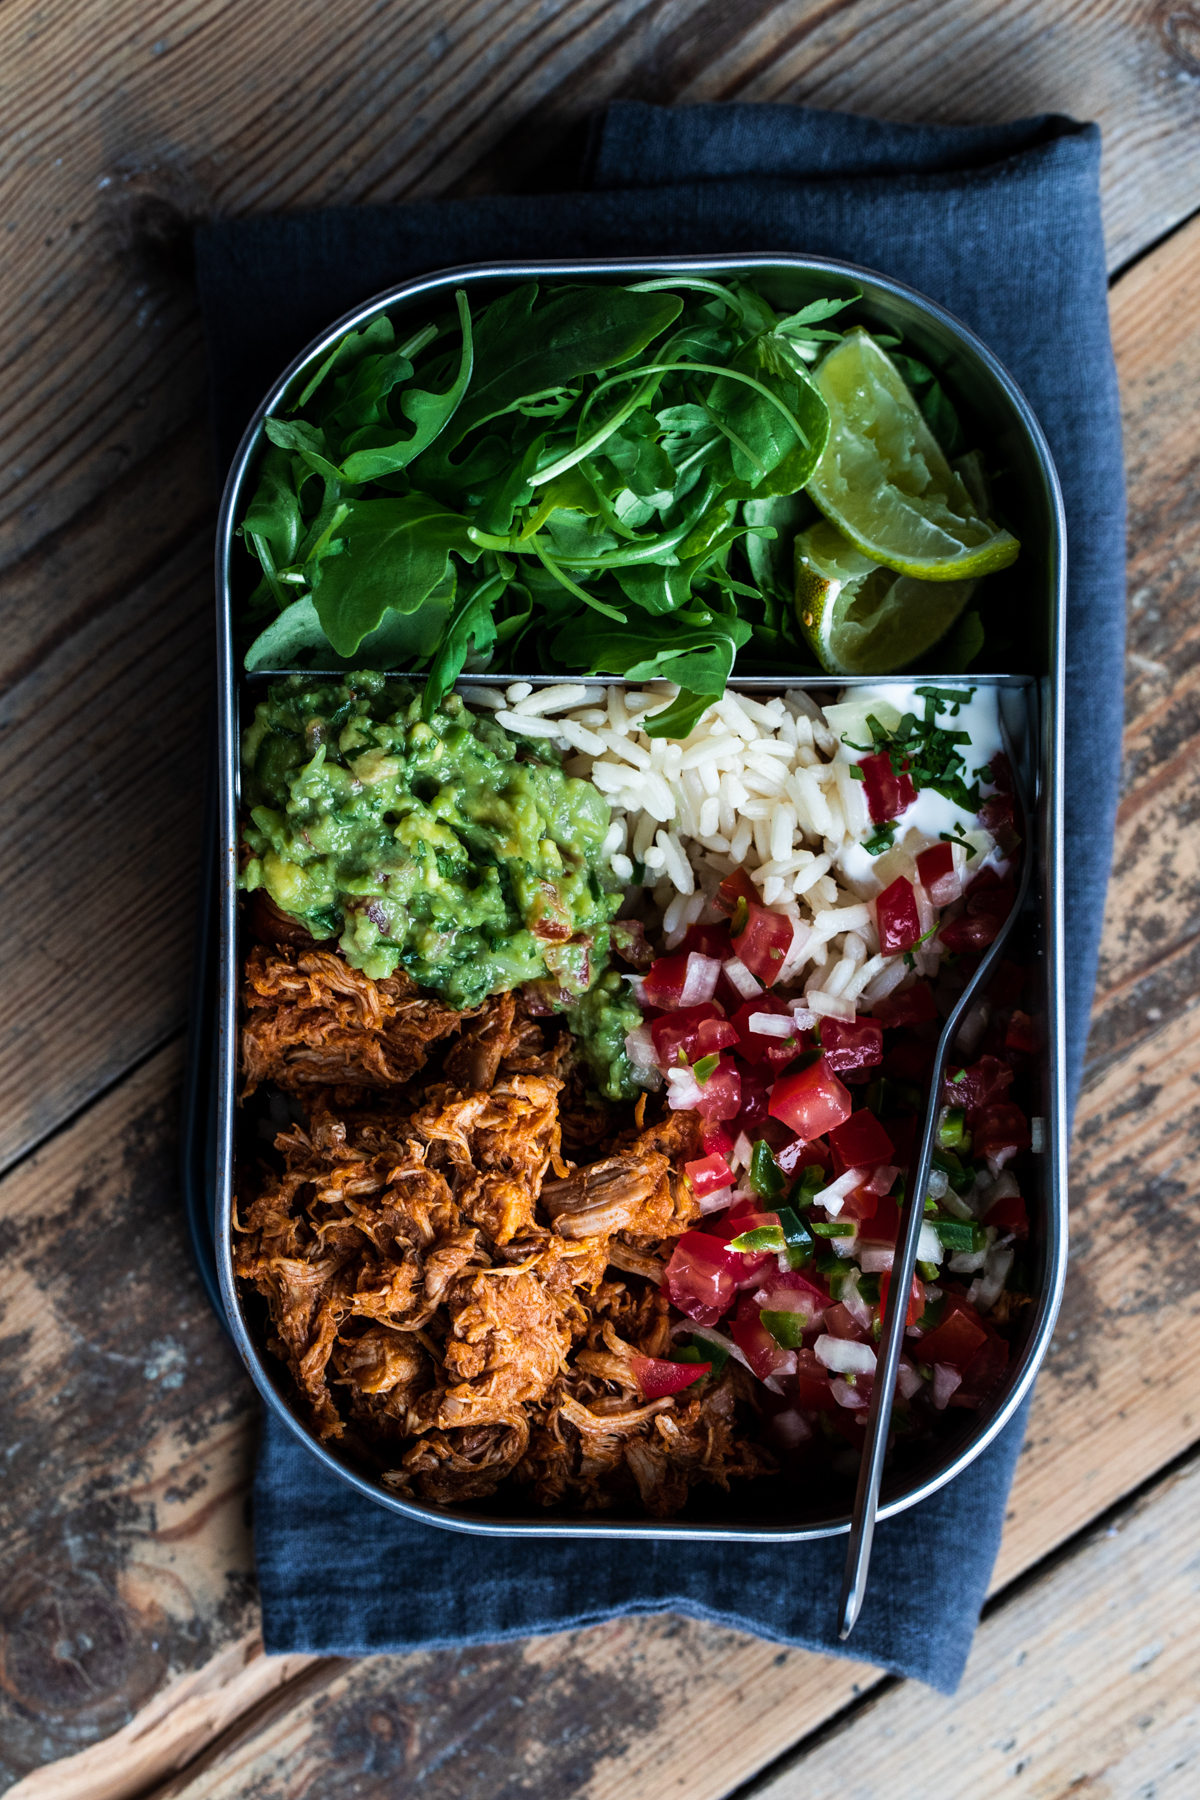 Overhead view of slow cooked chipotle chicken lunch box with guacamole, rice, pico de gallo and greens on a wooden background.